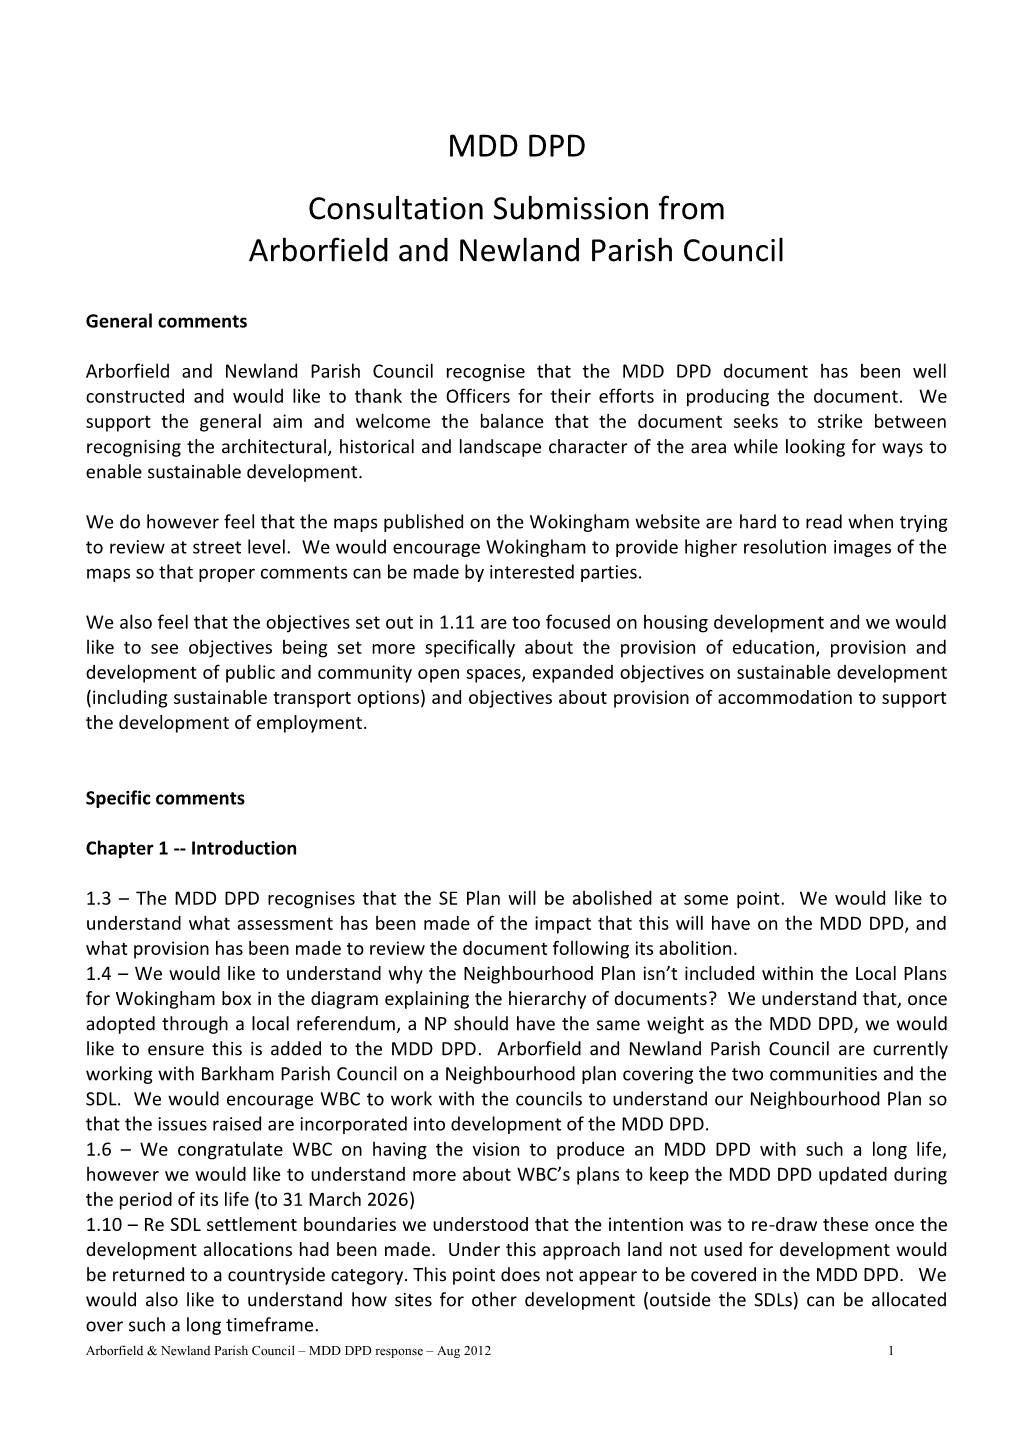 MDD DPD Consultation Submission from Arborfield and Newland Parish Council